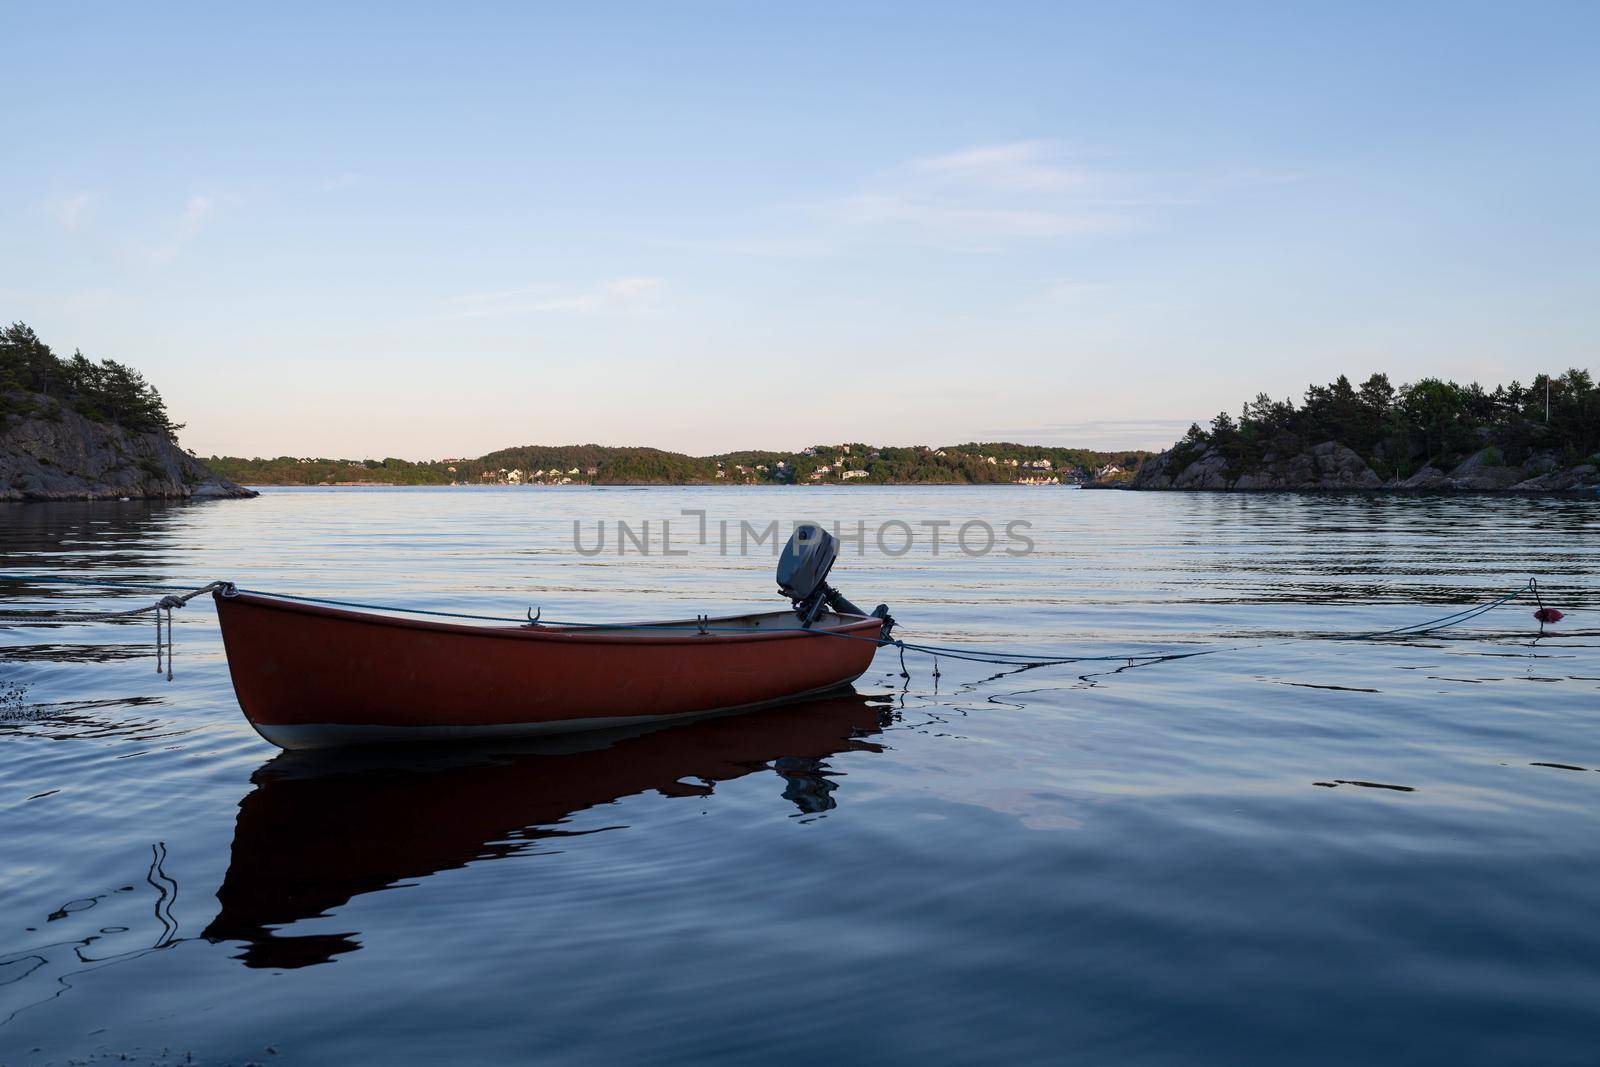 Small wooden boat in the middle of a lake, Lonely wooden boat in the water, isolated wooden boat, Top view of a white small wooden boat floating in the middle of a lake by isaiphoto